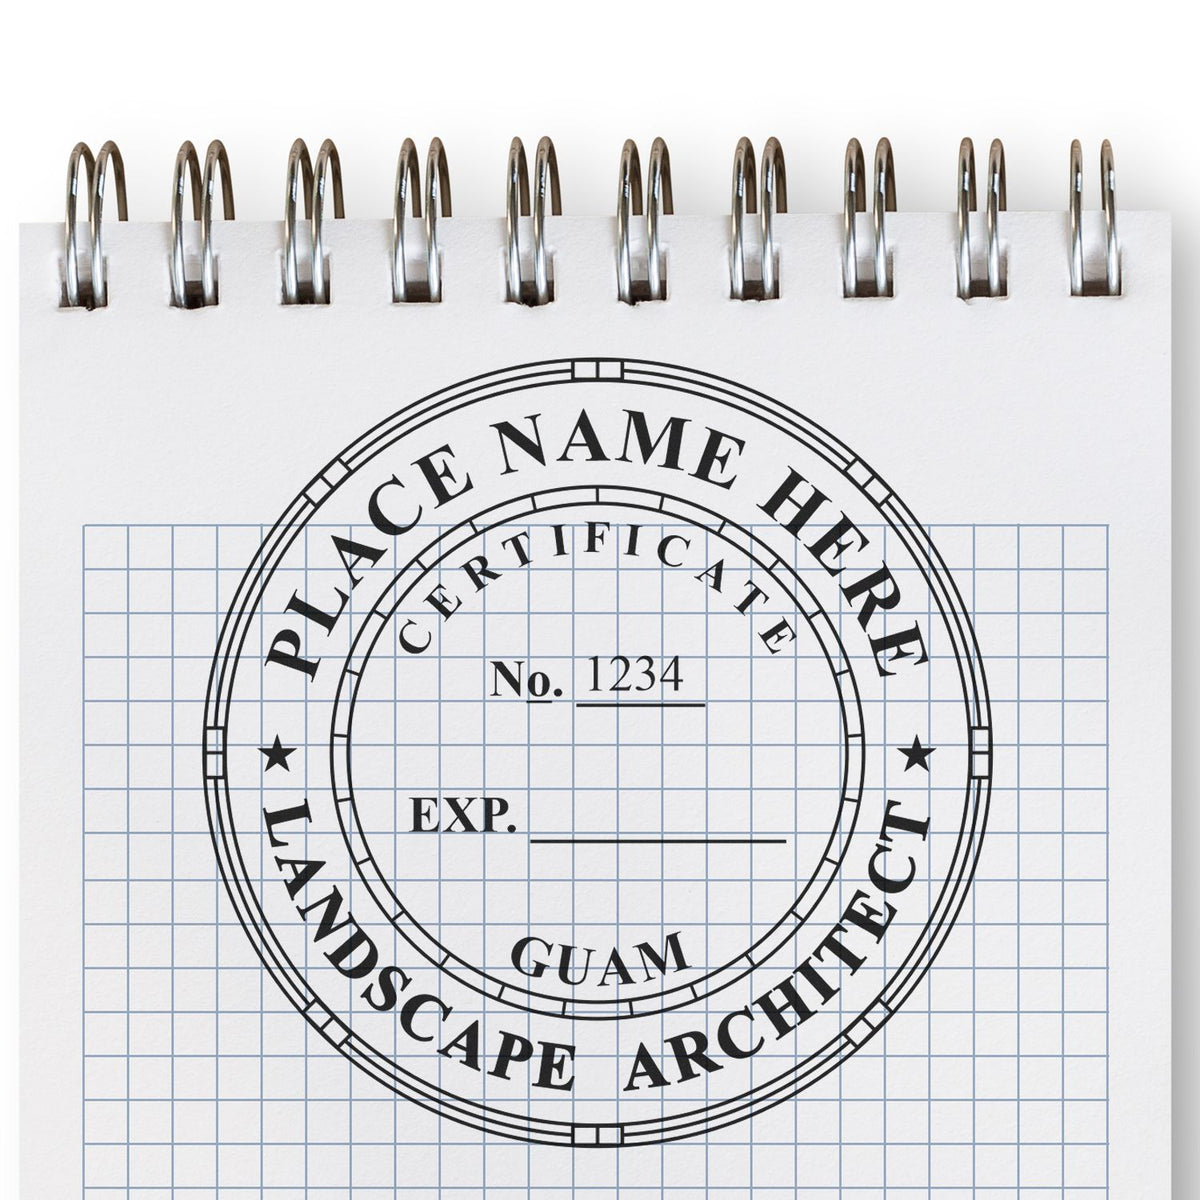 This paper is stamped with a sample imprint of the Slim Pre-Inked Guam Landscape Architect Seal Stamp, signifying its quality and reliability.